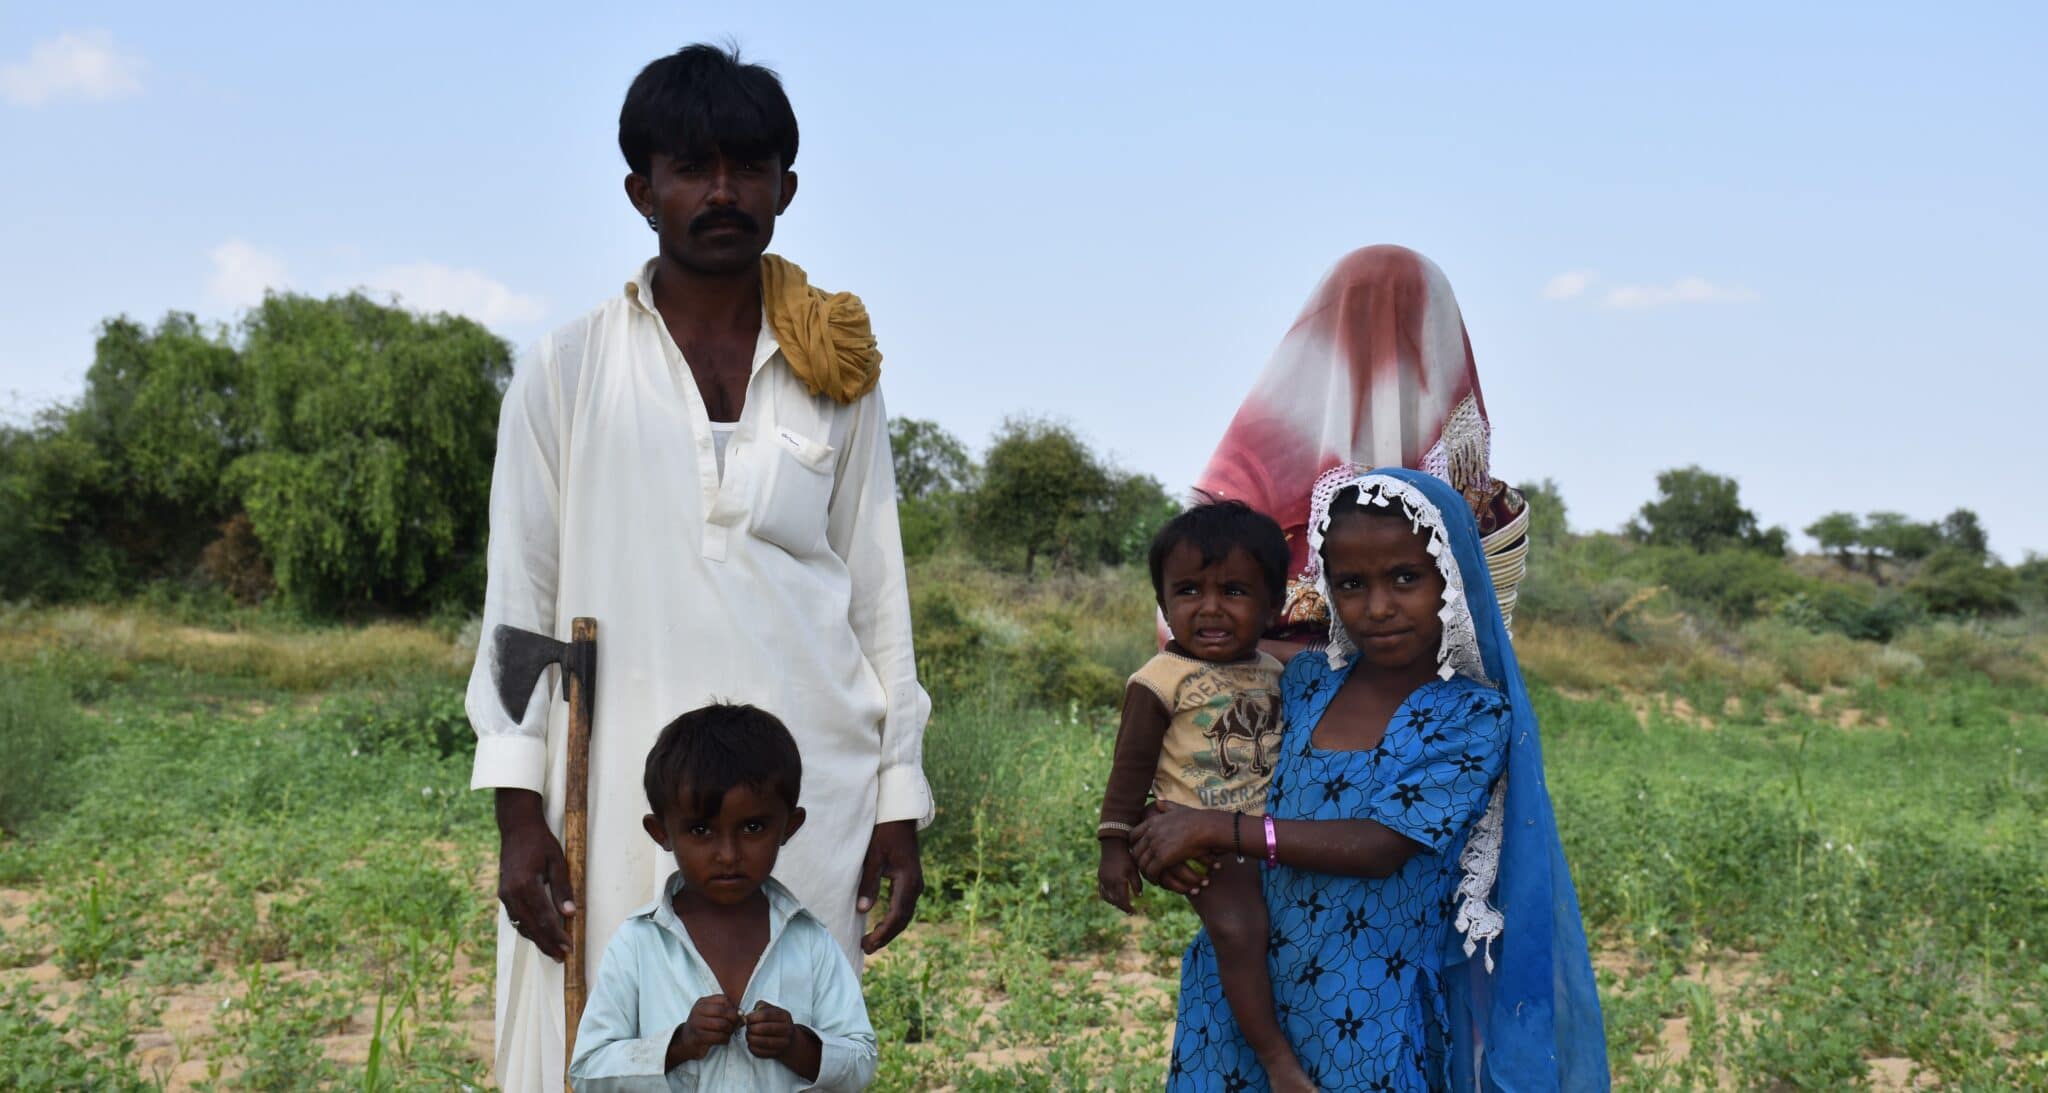 How a Rural Woman Farmer in Tharparkar Used Her Kitchen Garden to Survive the COVID-19 Pandemic